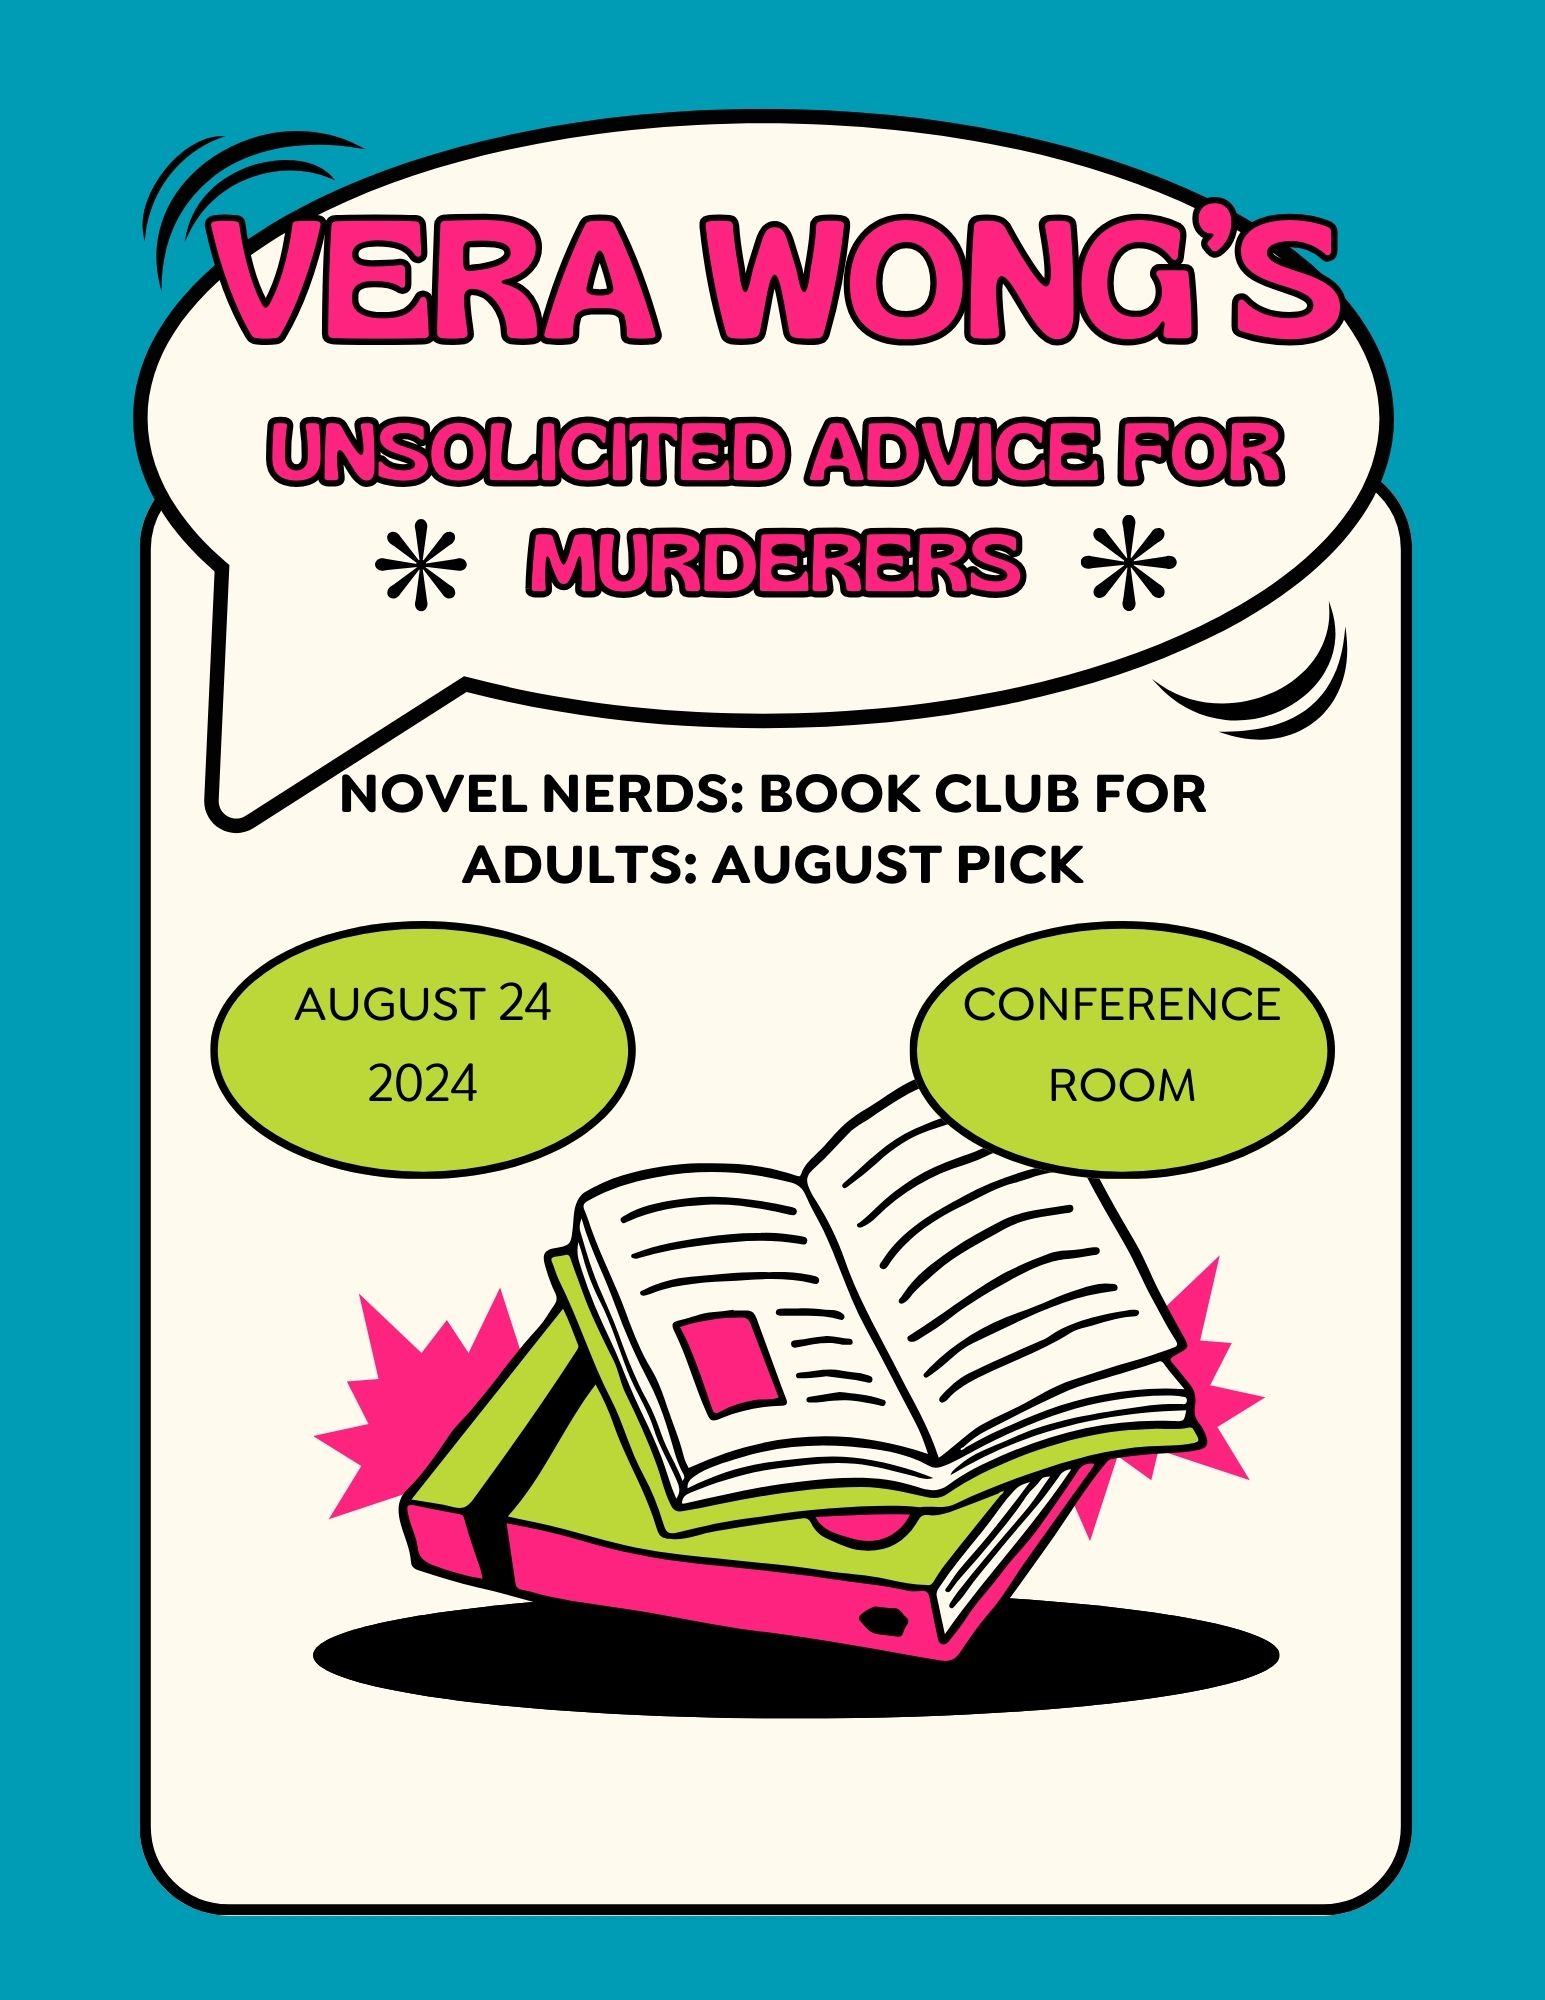 Novel Nerds Book Club at Smyrna Public Library, Saturday August 24 from 12pm to 1:30pm, reading Vera Wong's Unsolicited Advice for Murderers by Jesse Q. Sutanto